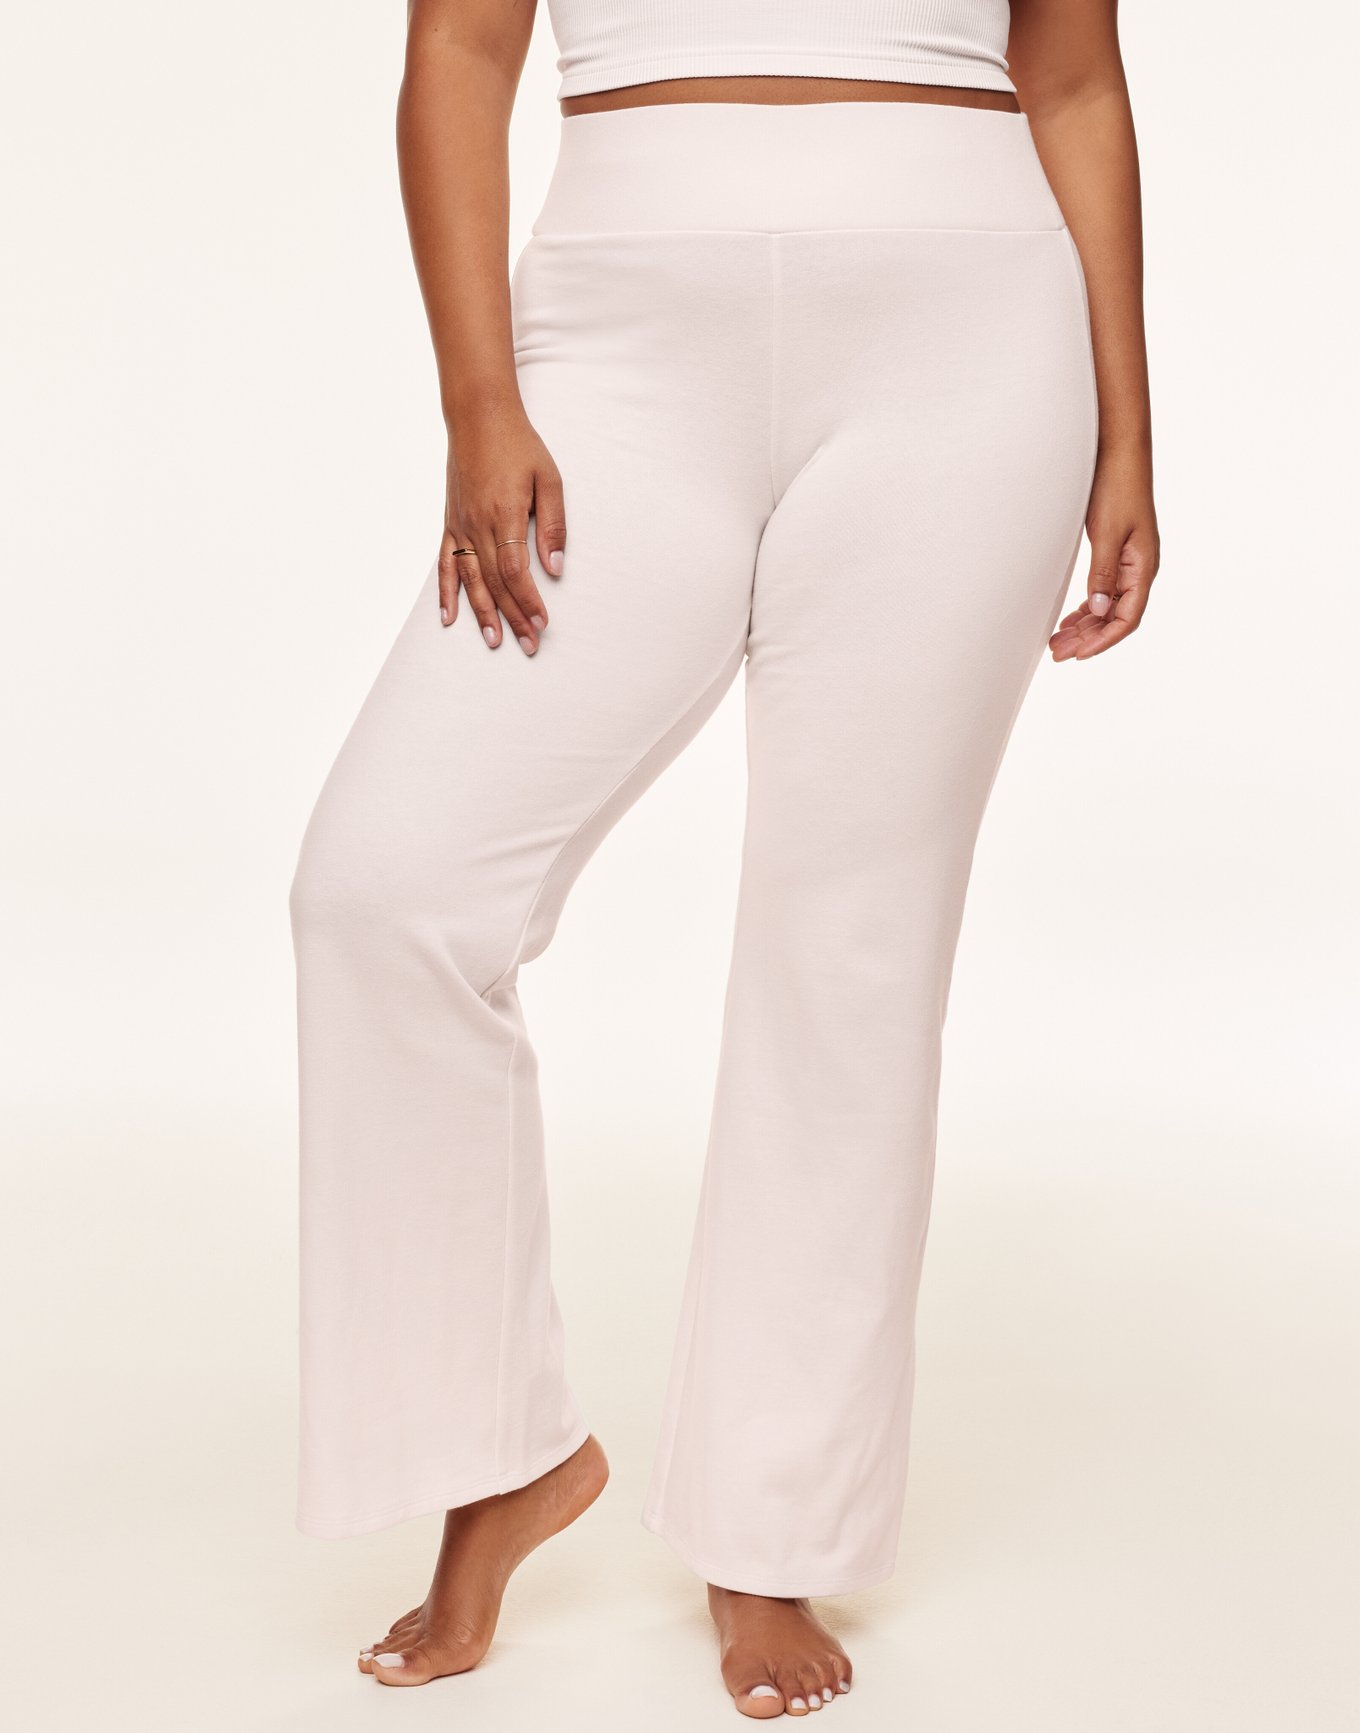 Cato Fashions  Cato Plus Size Ribbed Cropped Leggings